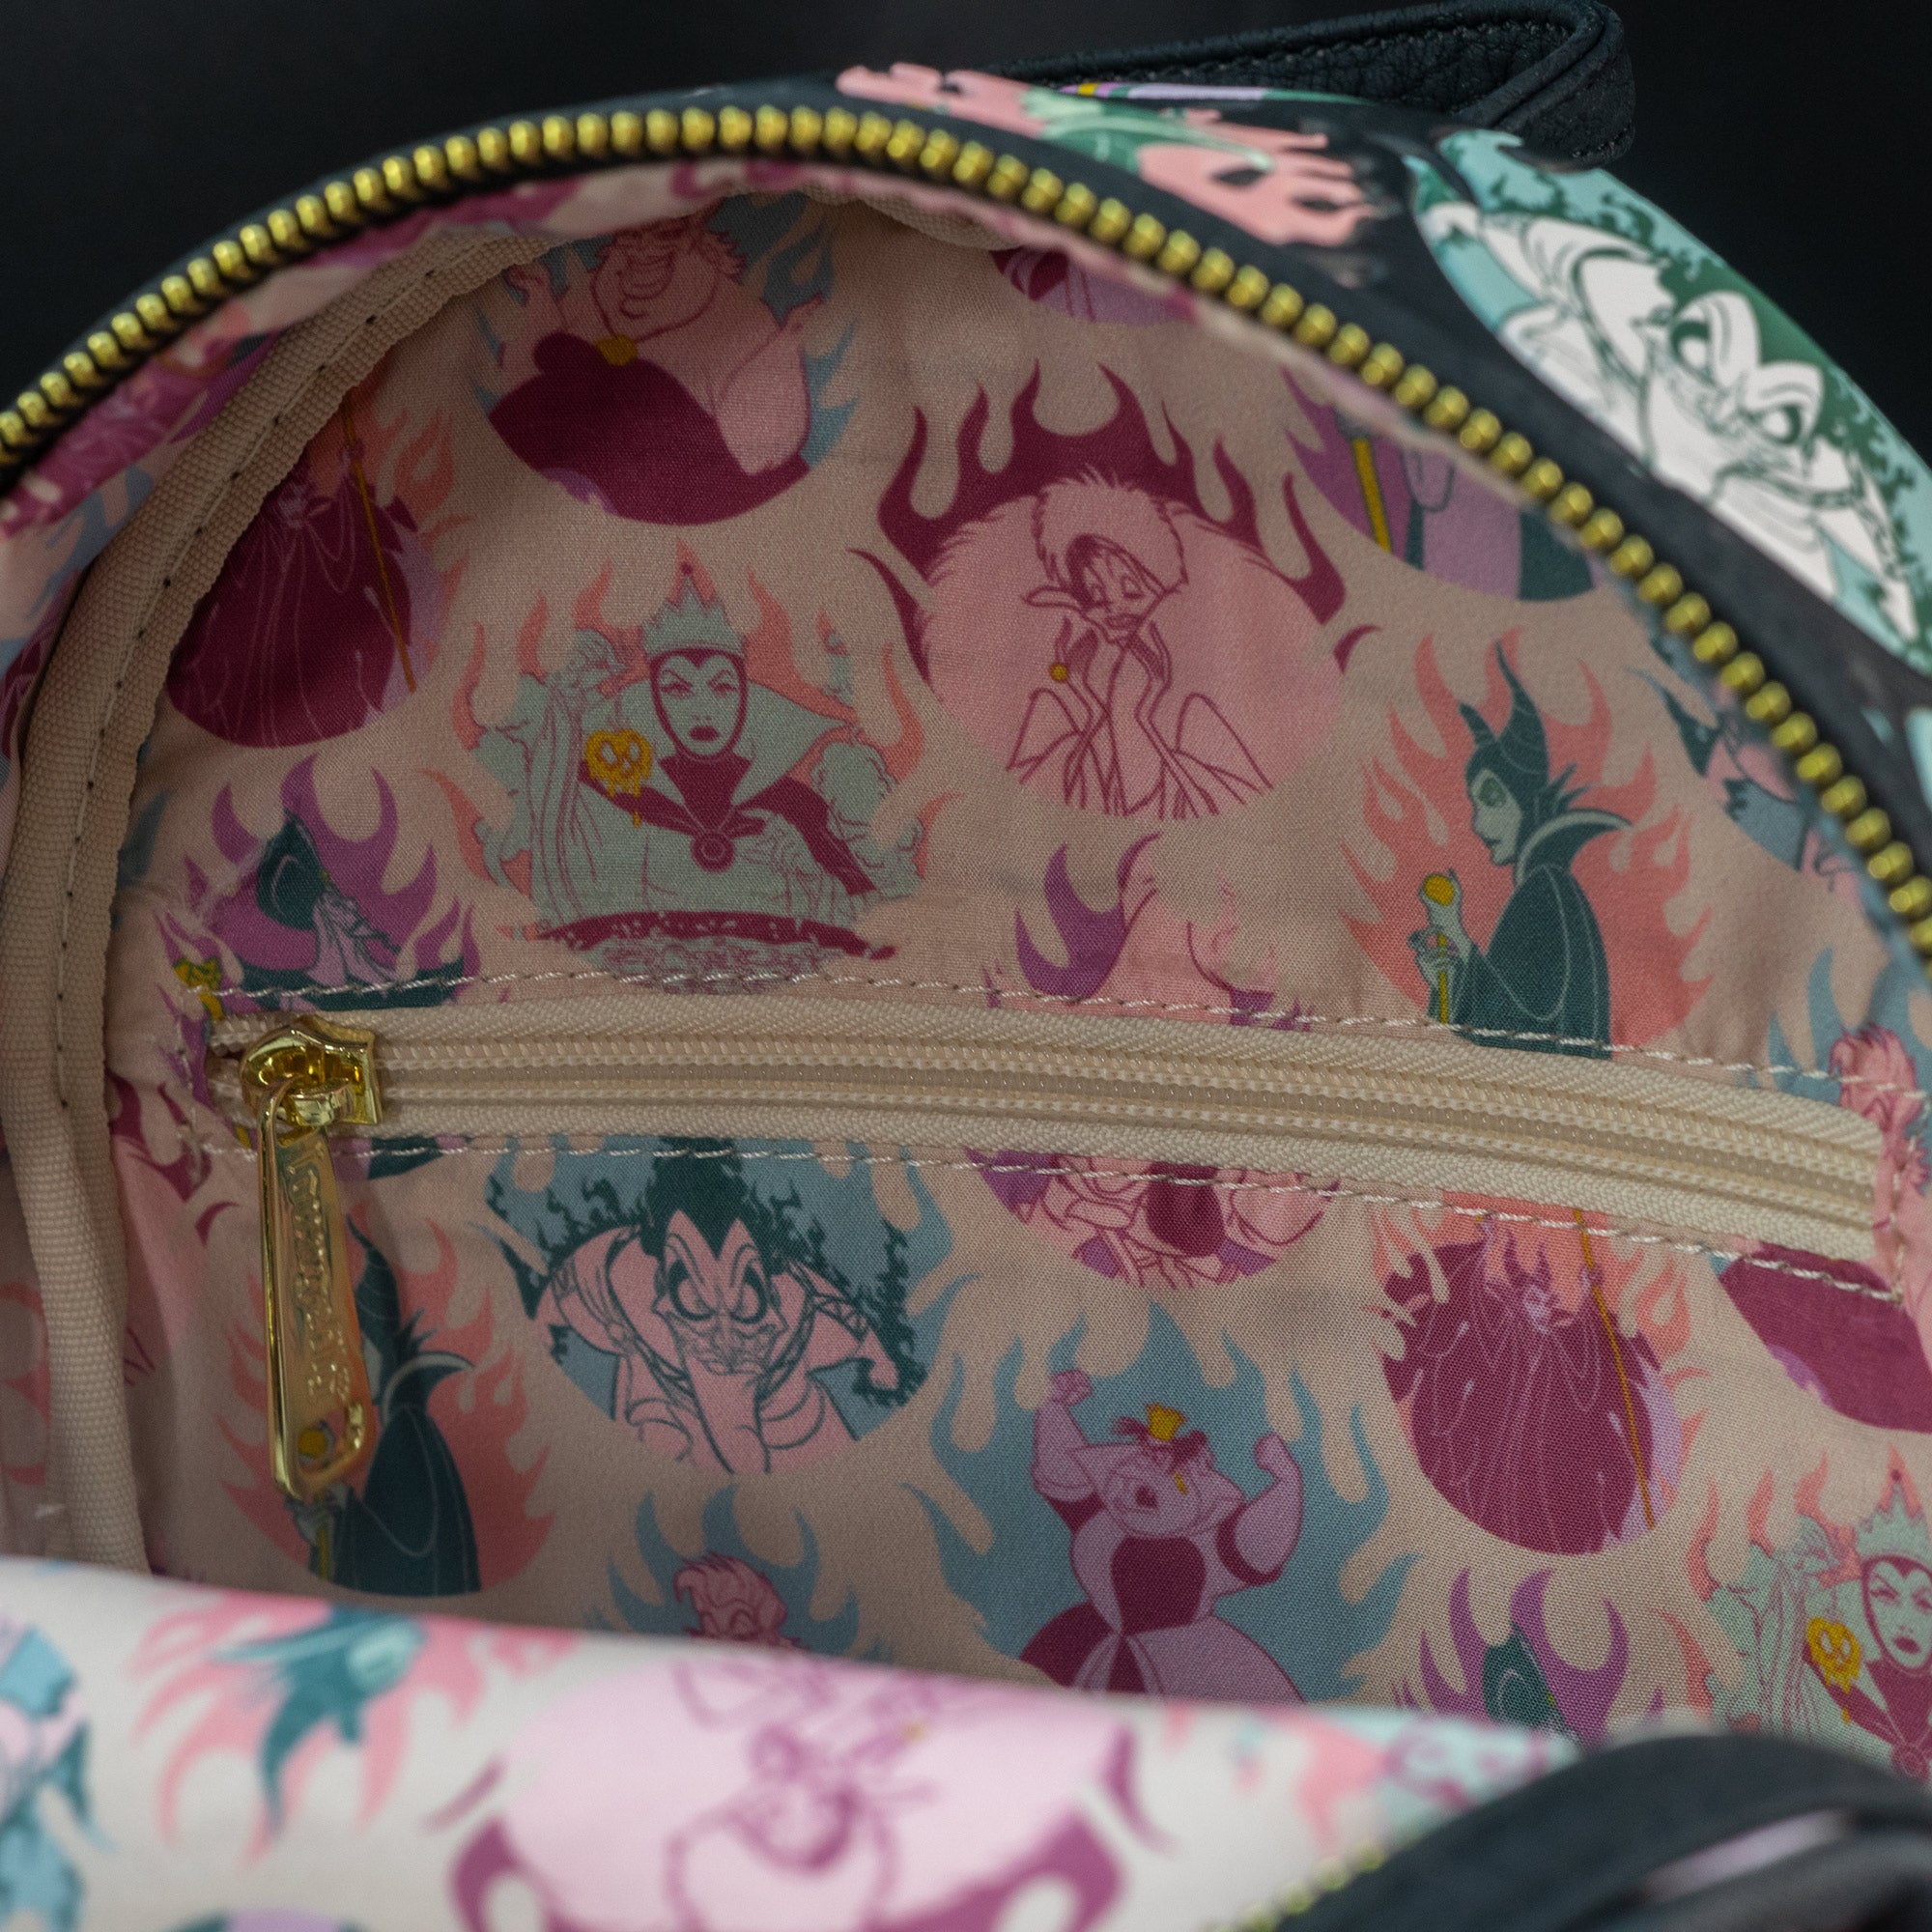 Loungefly x Disney Villains Pastel Flames Mini Backpack